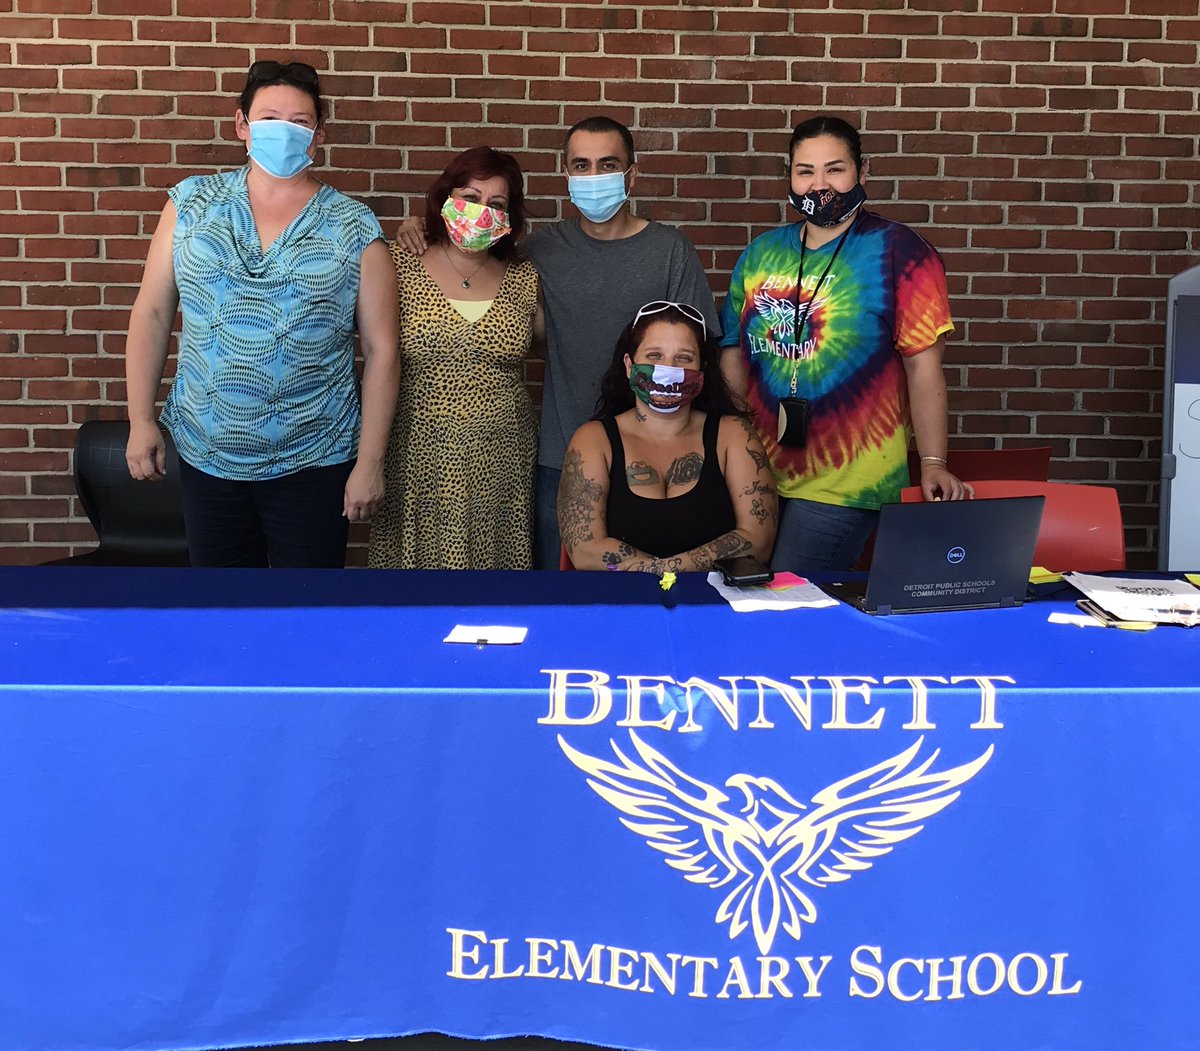 What a great team today at Bennett! We helped over 100 students today with their devices. Committed to helping families.#DPSCDProud #connectedfutures